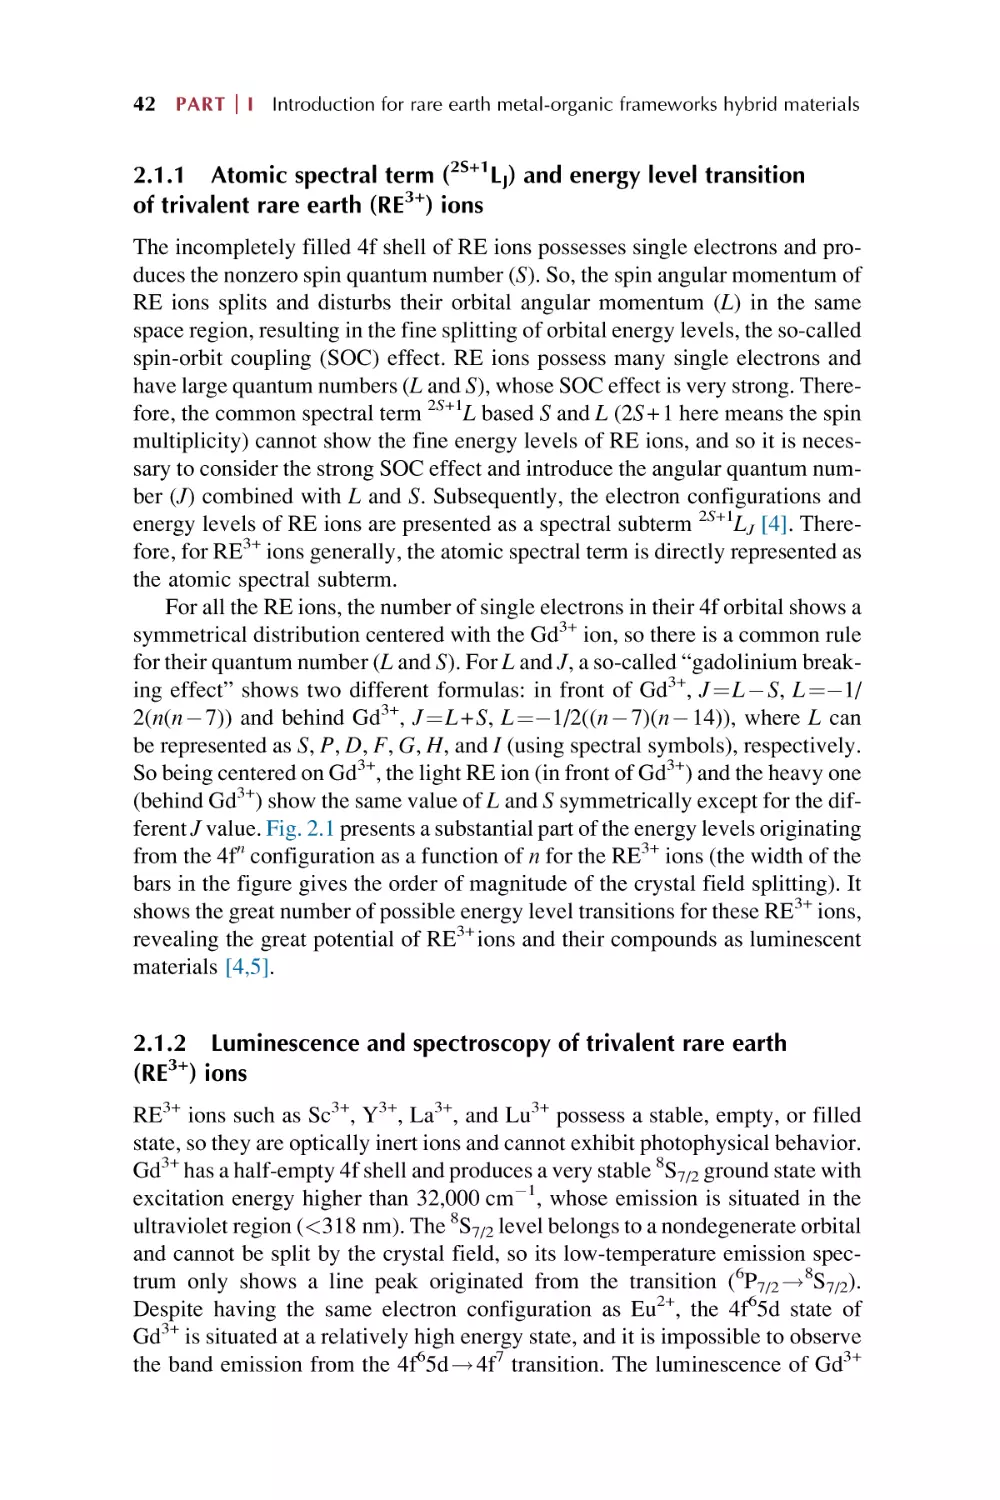 2.1.1. Atomic spectral term (2S+1LJ) and energy level transition of trivalent rare earth (RE3+) ions
2.1.2. Luminescence and spectroscopy of trivalent rare earth (RE3+) ions